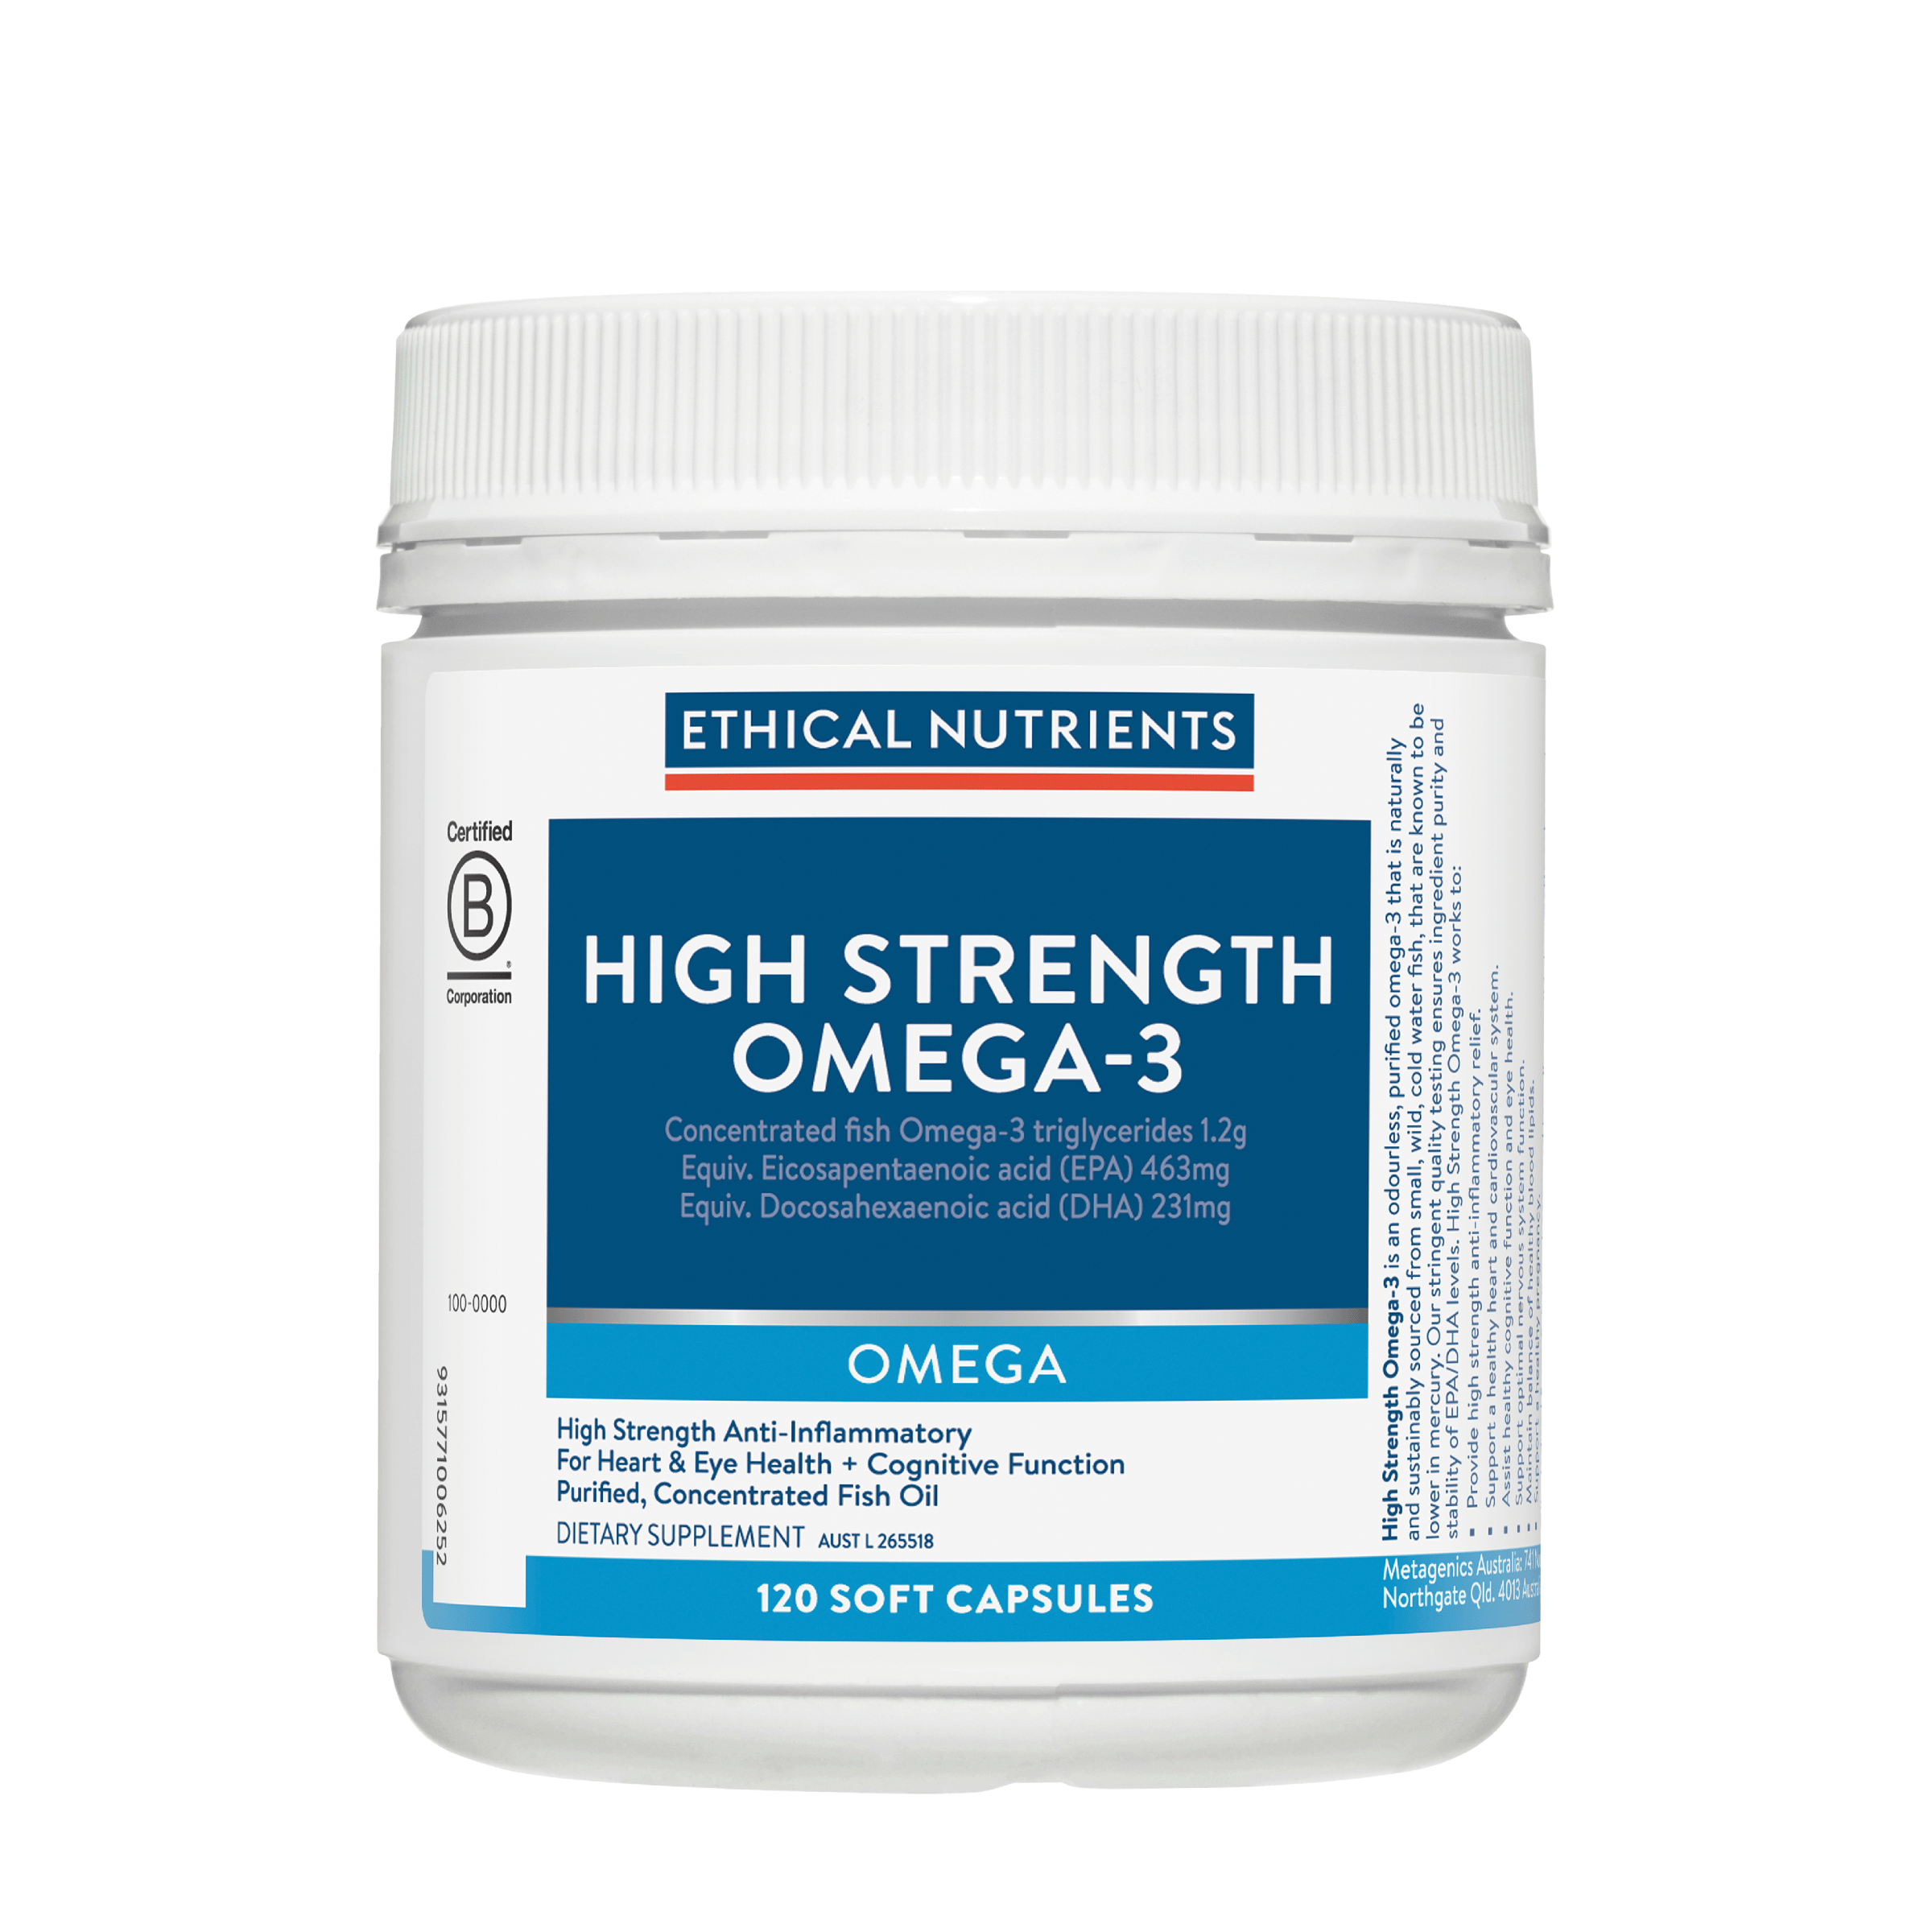 Ethical Nutrients High Strength Omega-3 120 Capsules #size_120 soft capsules